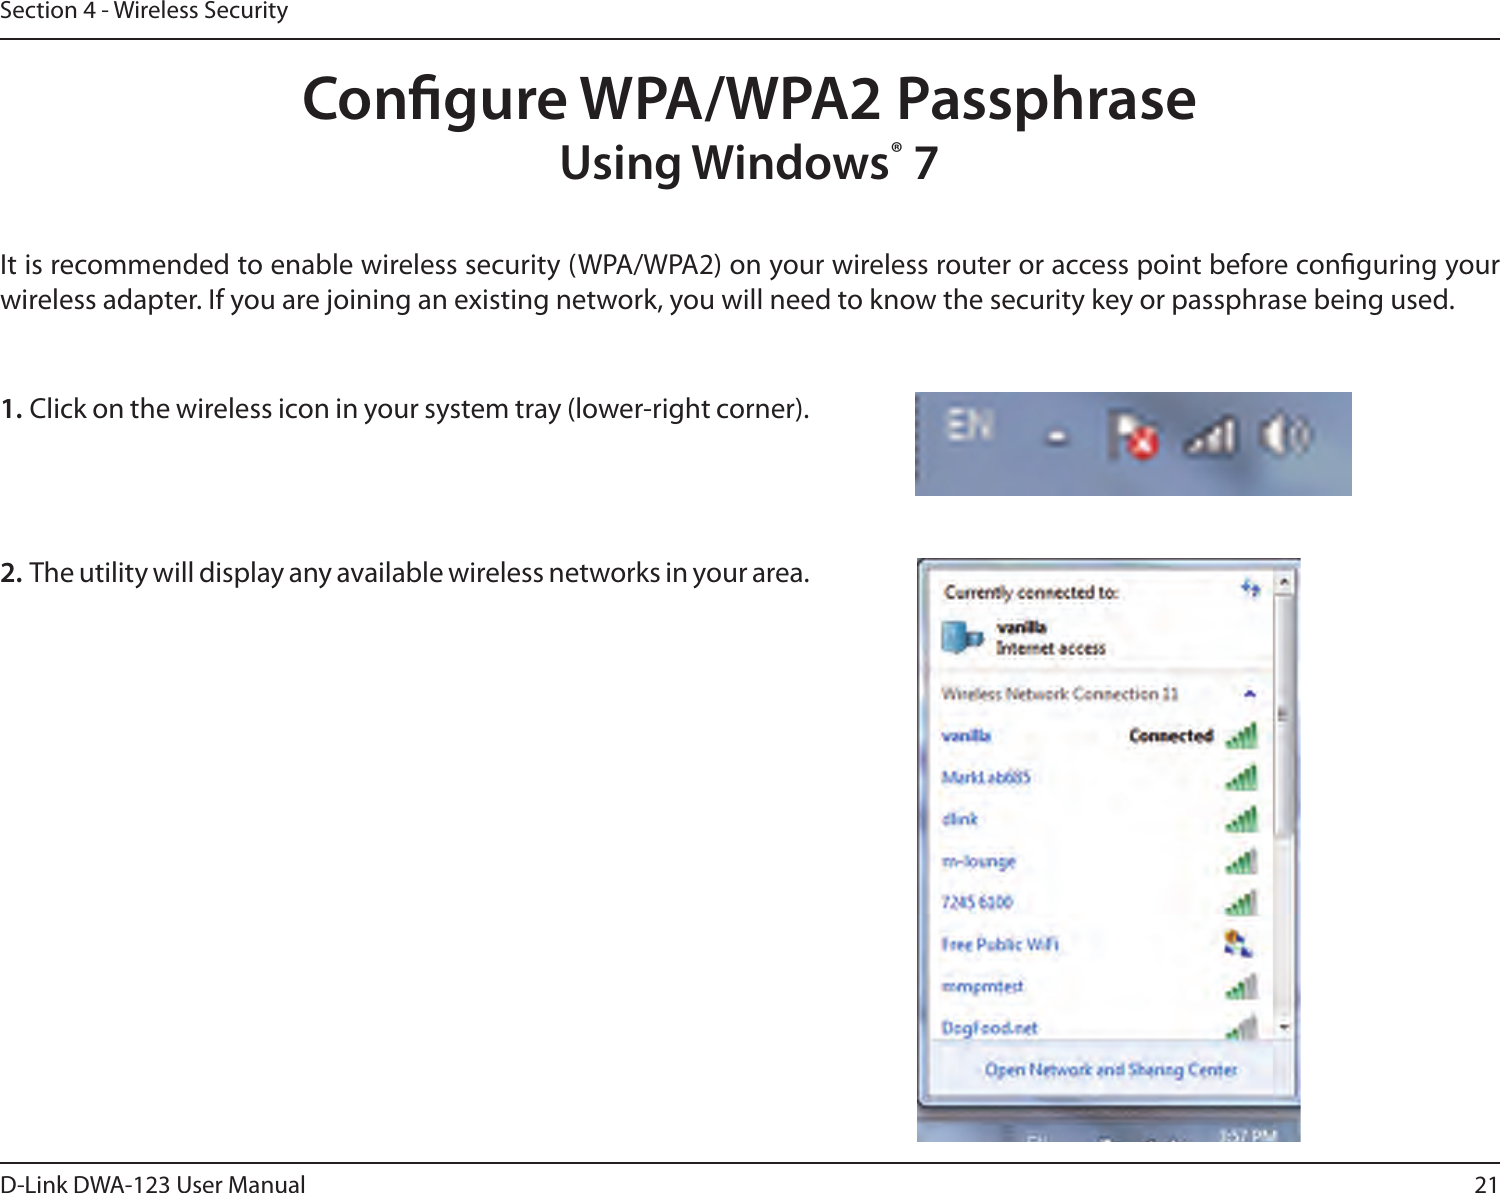 21D-Link DWA-123 User ManualSection 4 - Wireless SecurityCongure WPA/WPA2 PassphraseUsing Windows® 7It is recommended to enable wireless security (WPA/WPA2) on your wireless router or access point before conguring your wireless adapter. If you are joining an existing network, you will need to know the security key or passphrase being used.2. The utility will display any available wireless networks in your area.1. Click on the wireless icon in your system tray (lower-right corner).